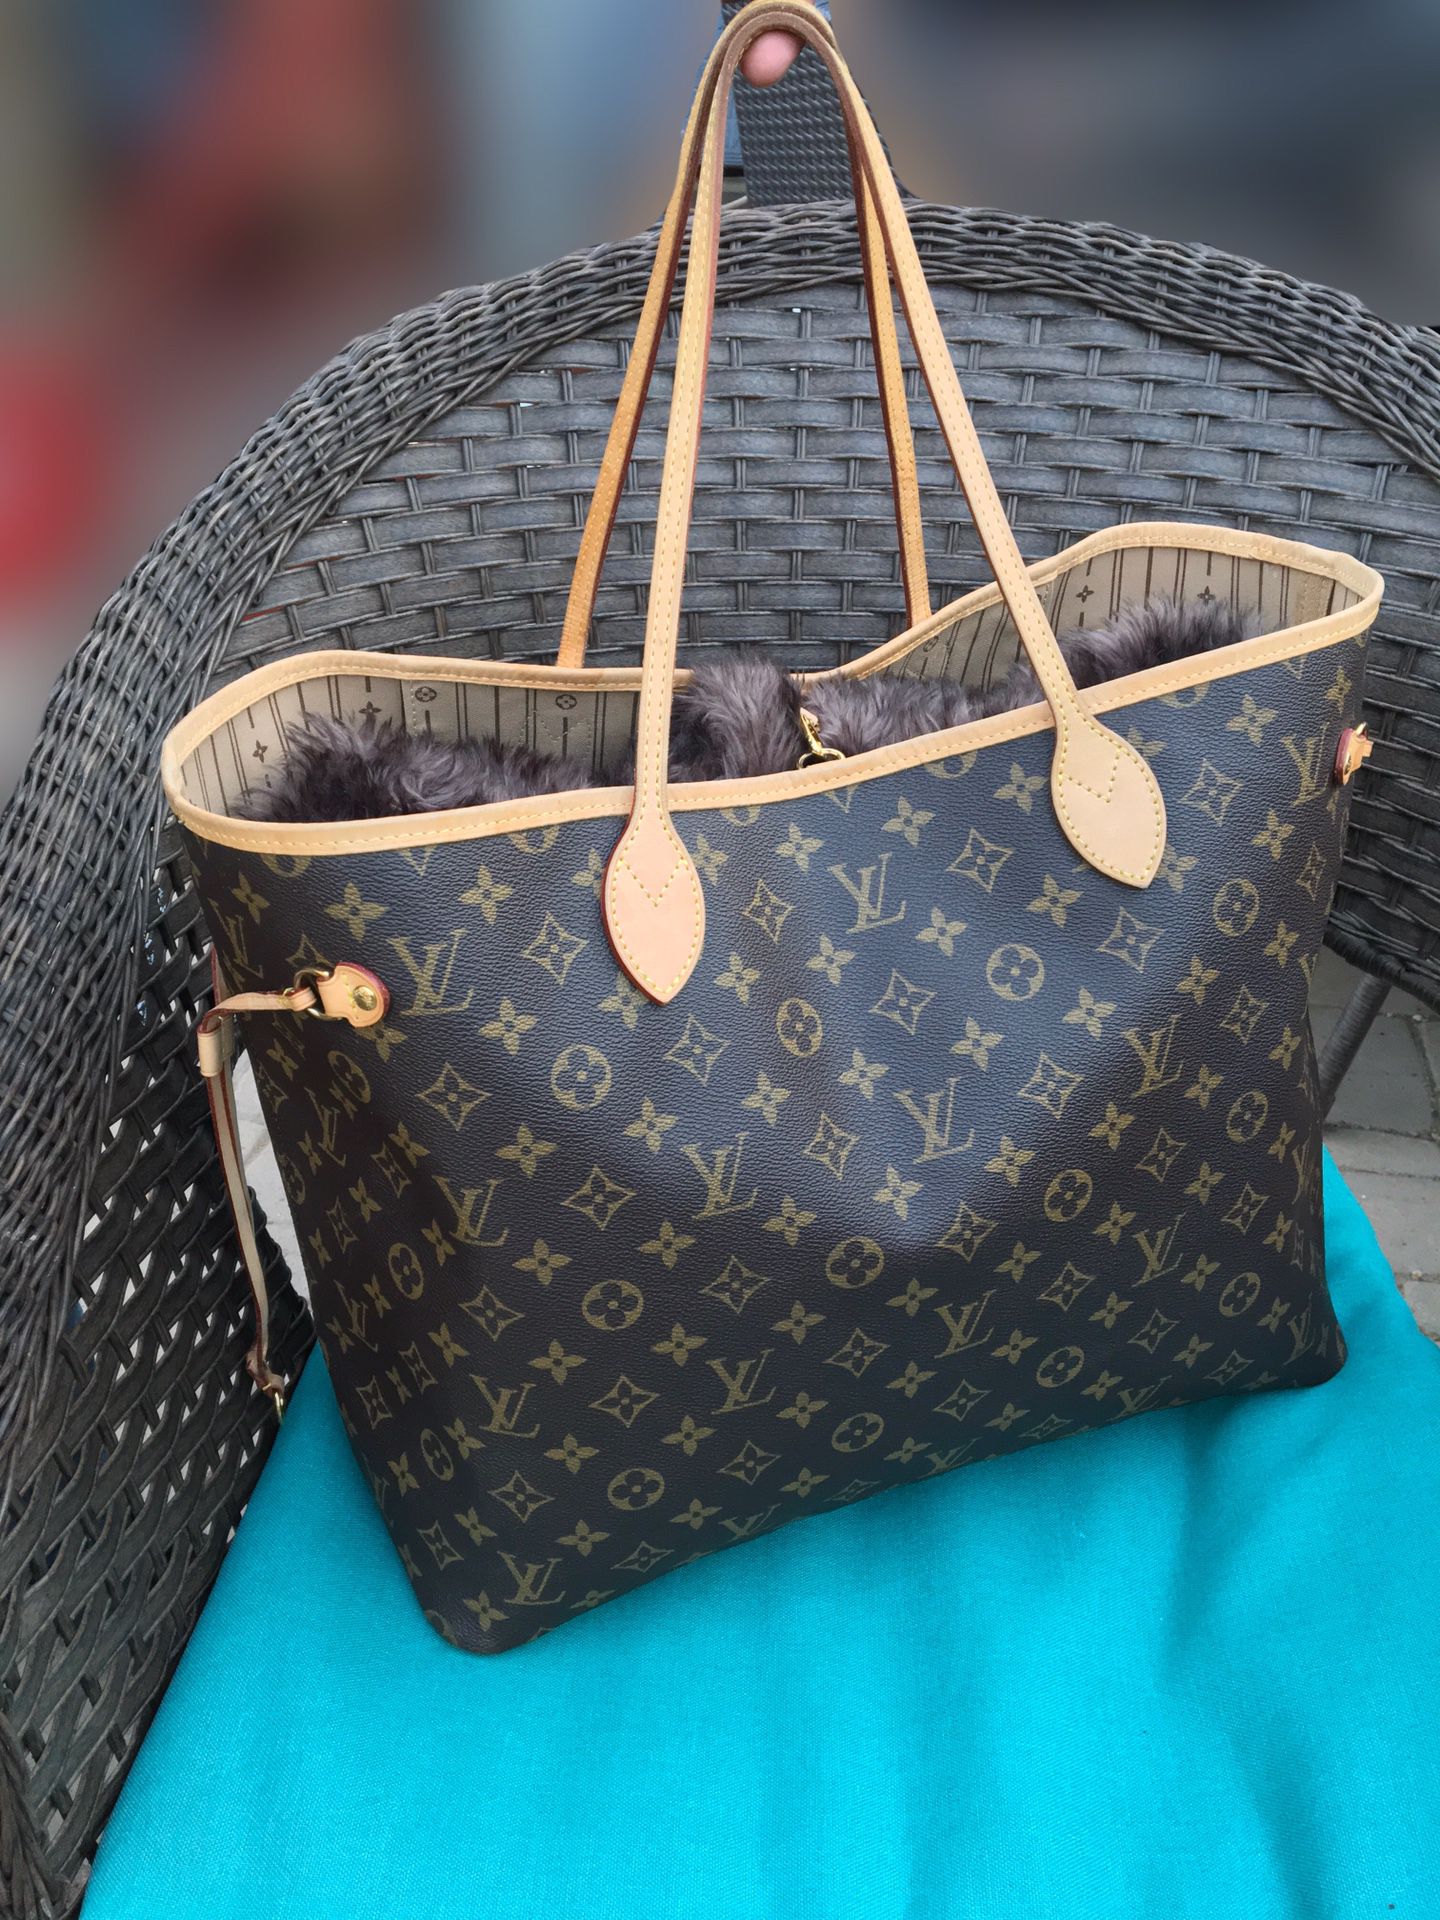 Authentic Louis Vuitton Monogram Neverfull GM for Sale in Glendale, AZ -  OfferUp